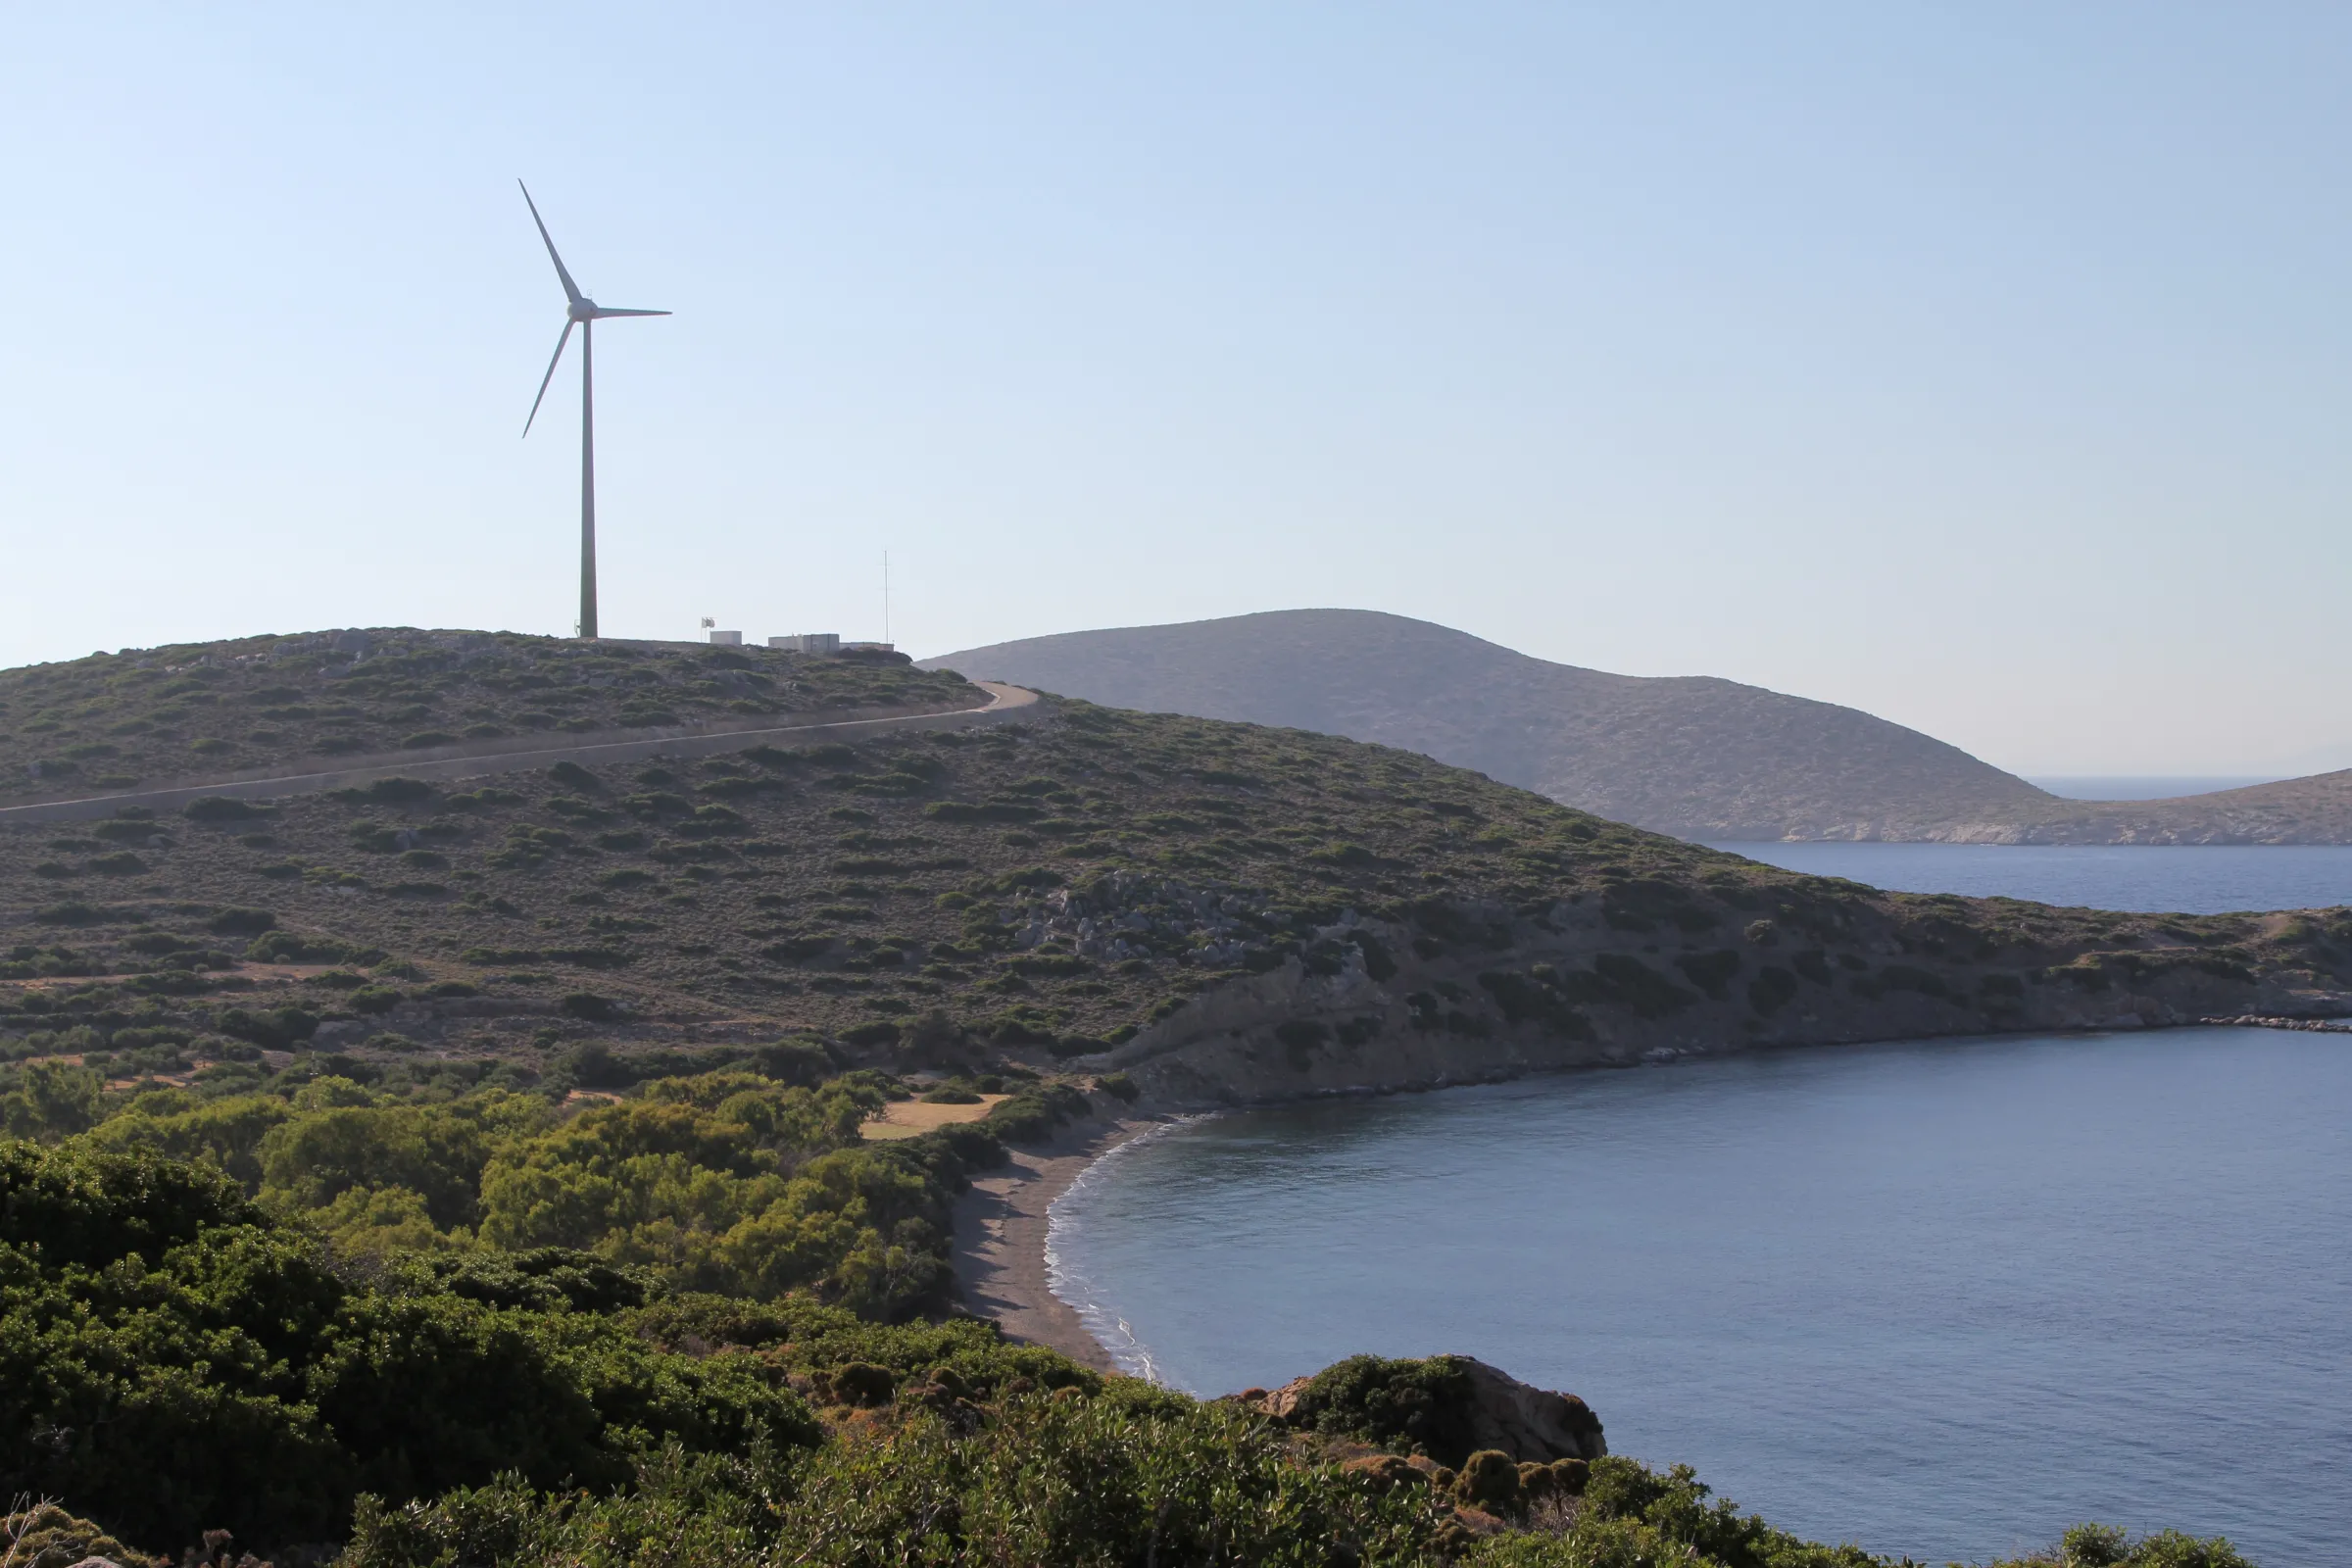 A wind turbine operated by Greek power company Eunice Energy Group is pictured on the Greek island of Tilos